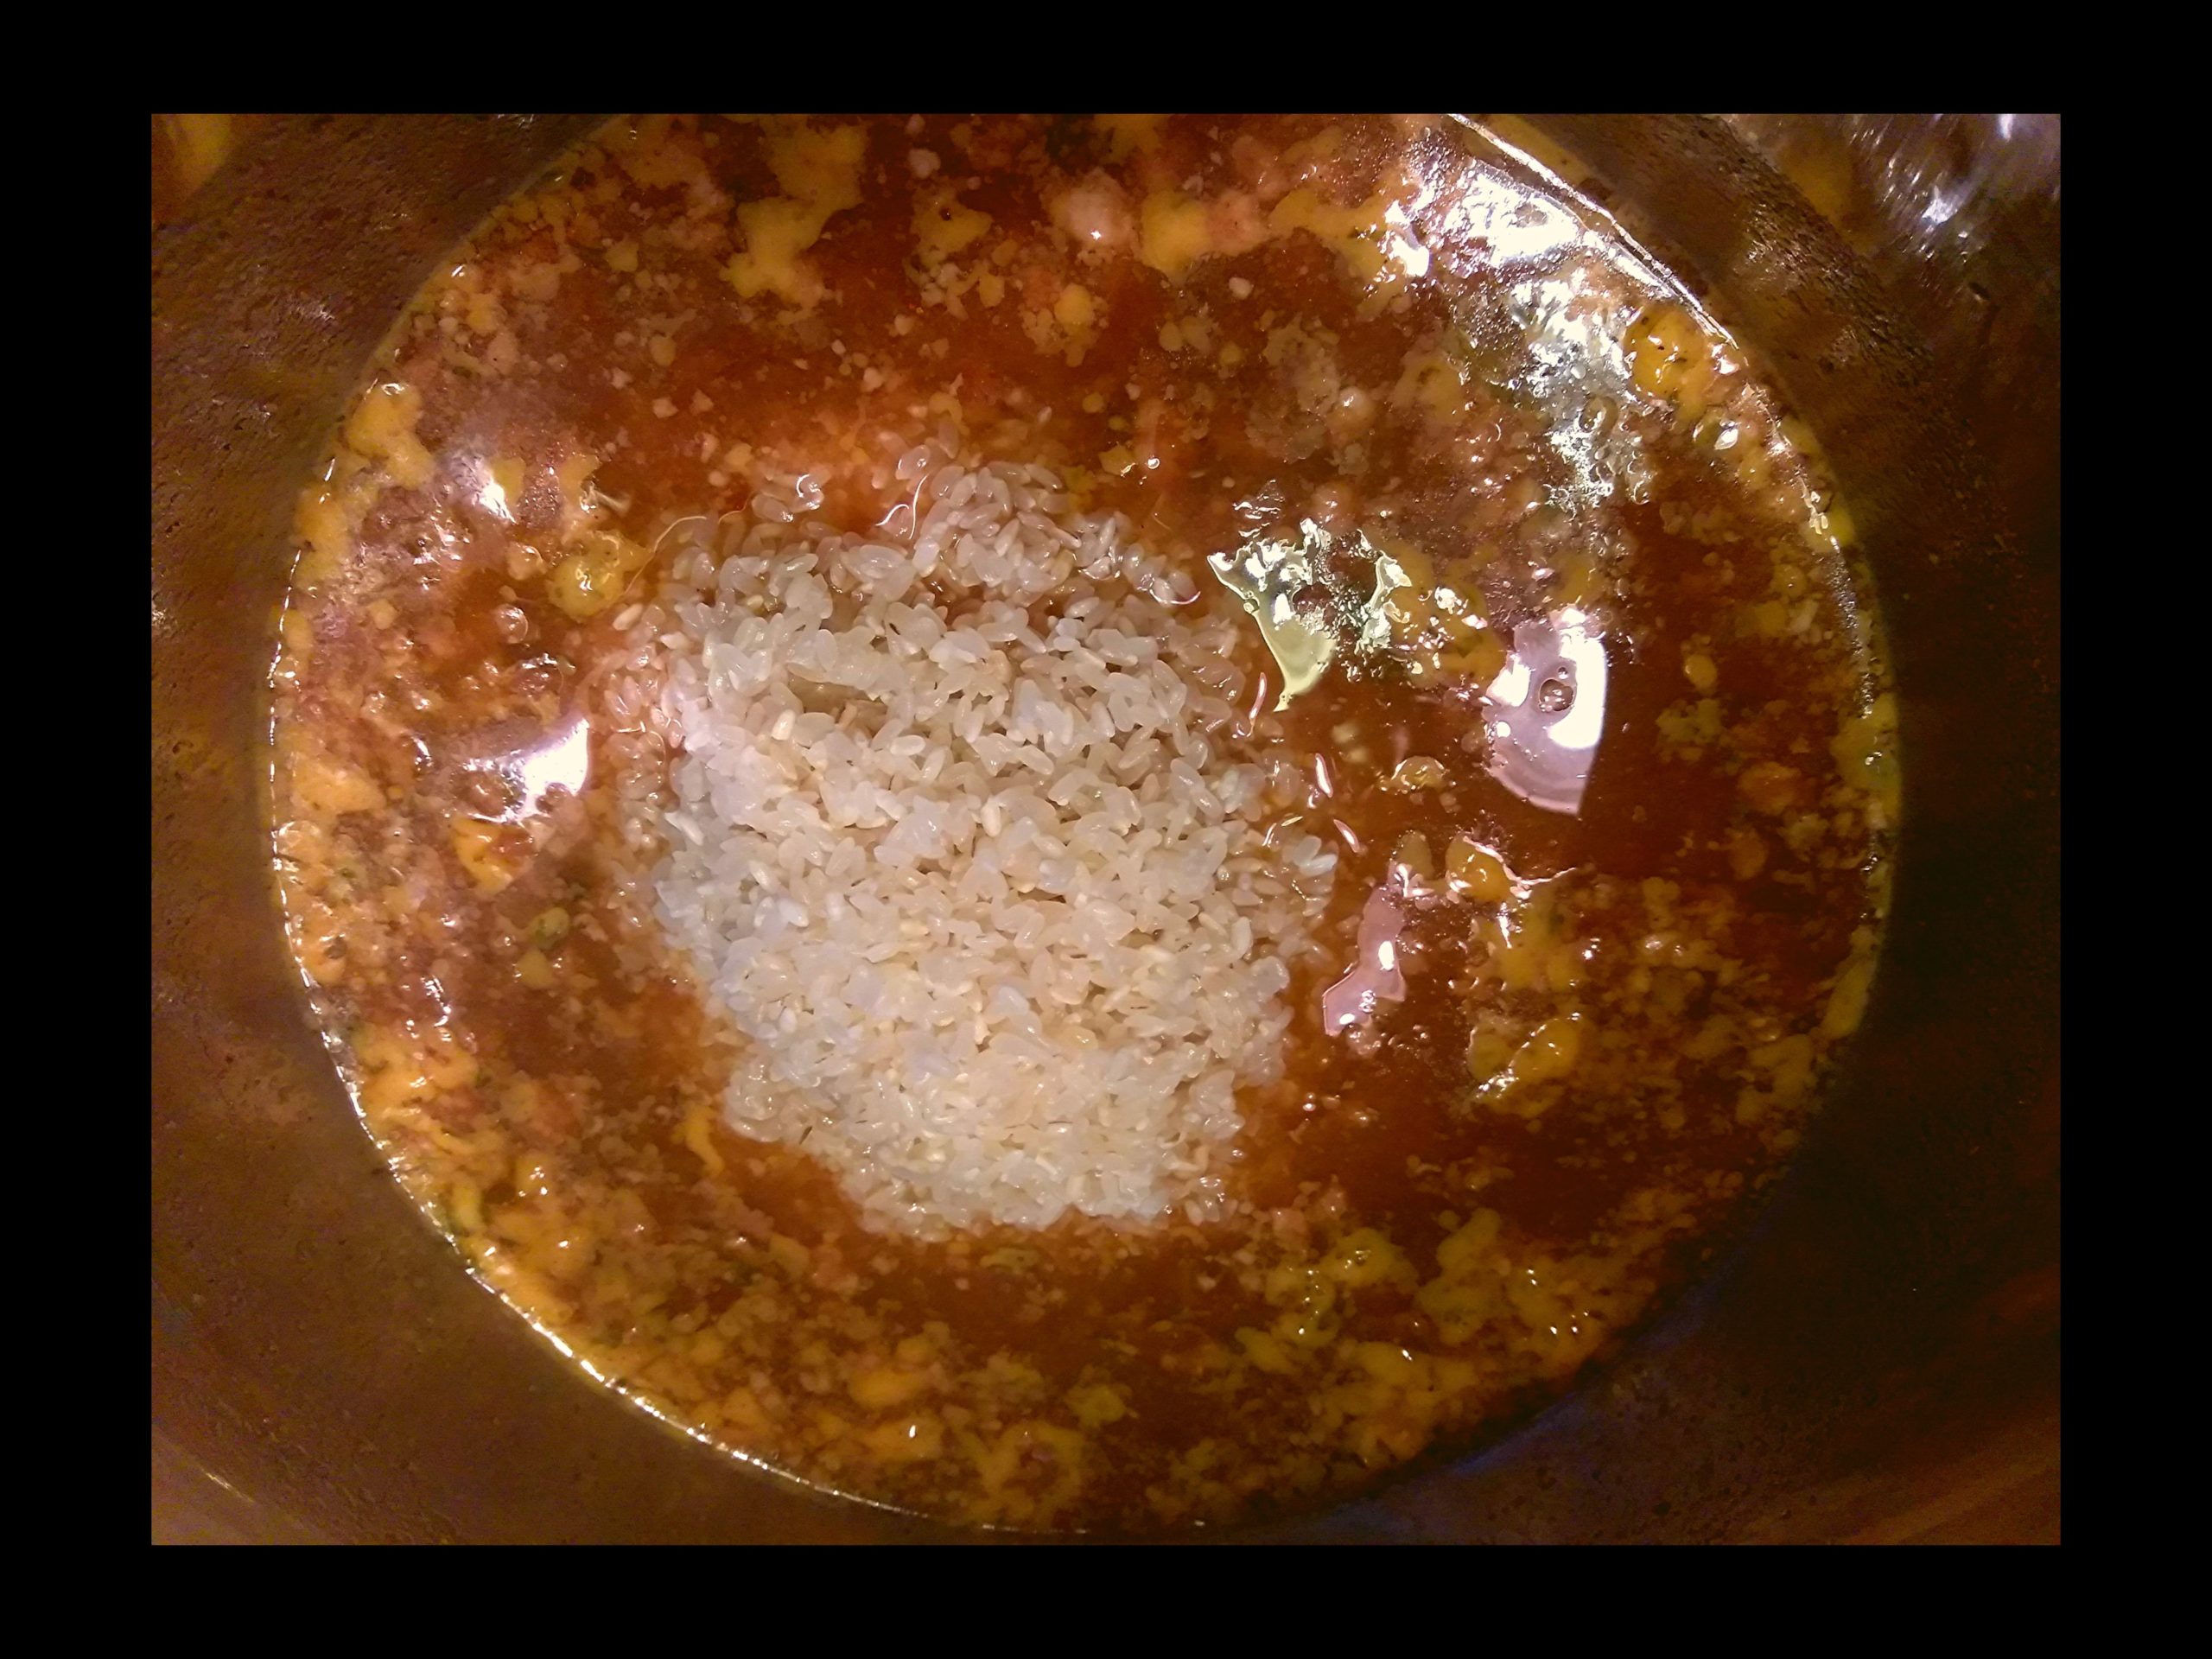 The inside of an Instant Pot with Savoies Cajun Dressing Mix and a pile up uncooked medium grain white rice